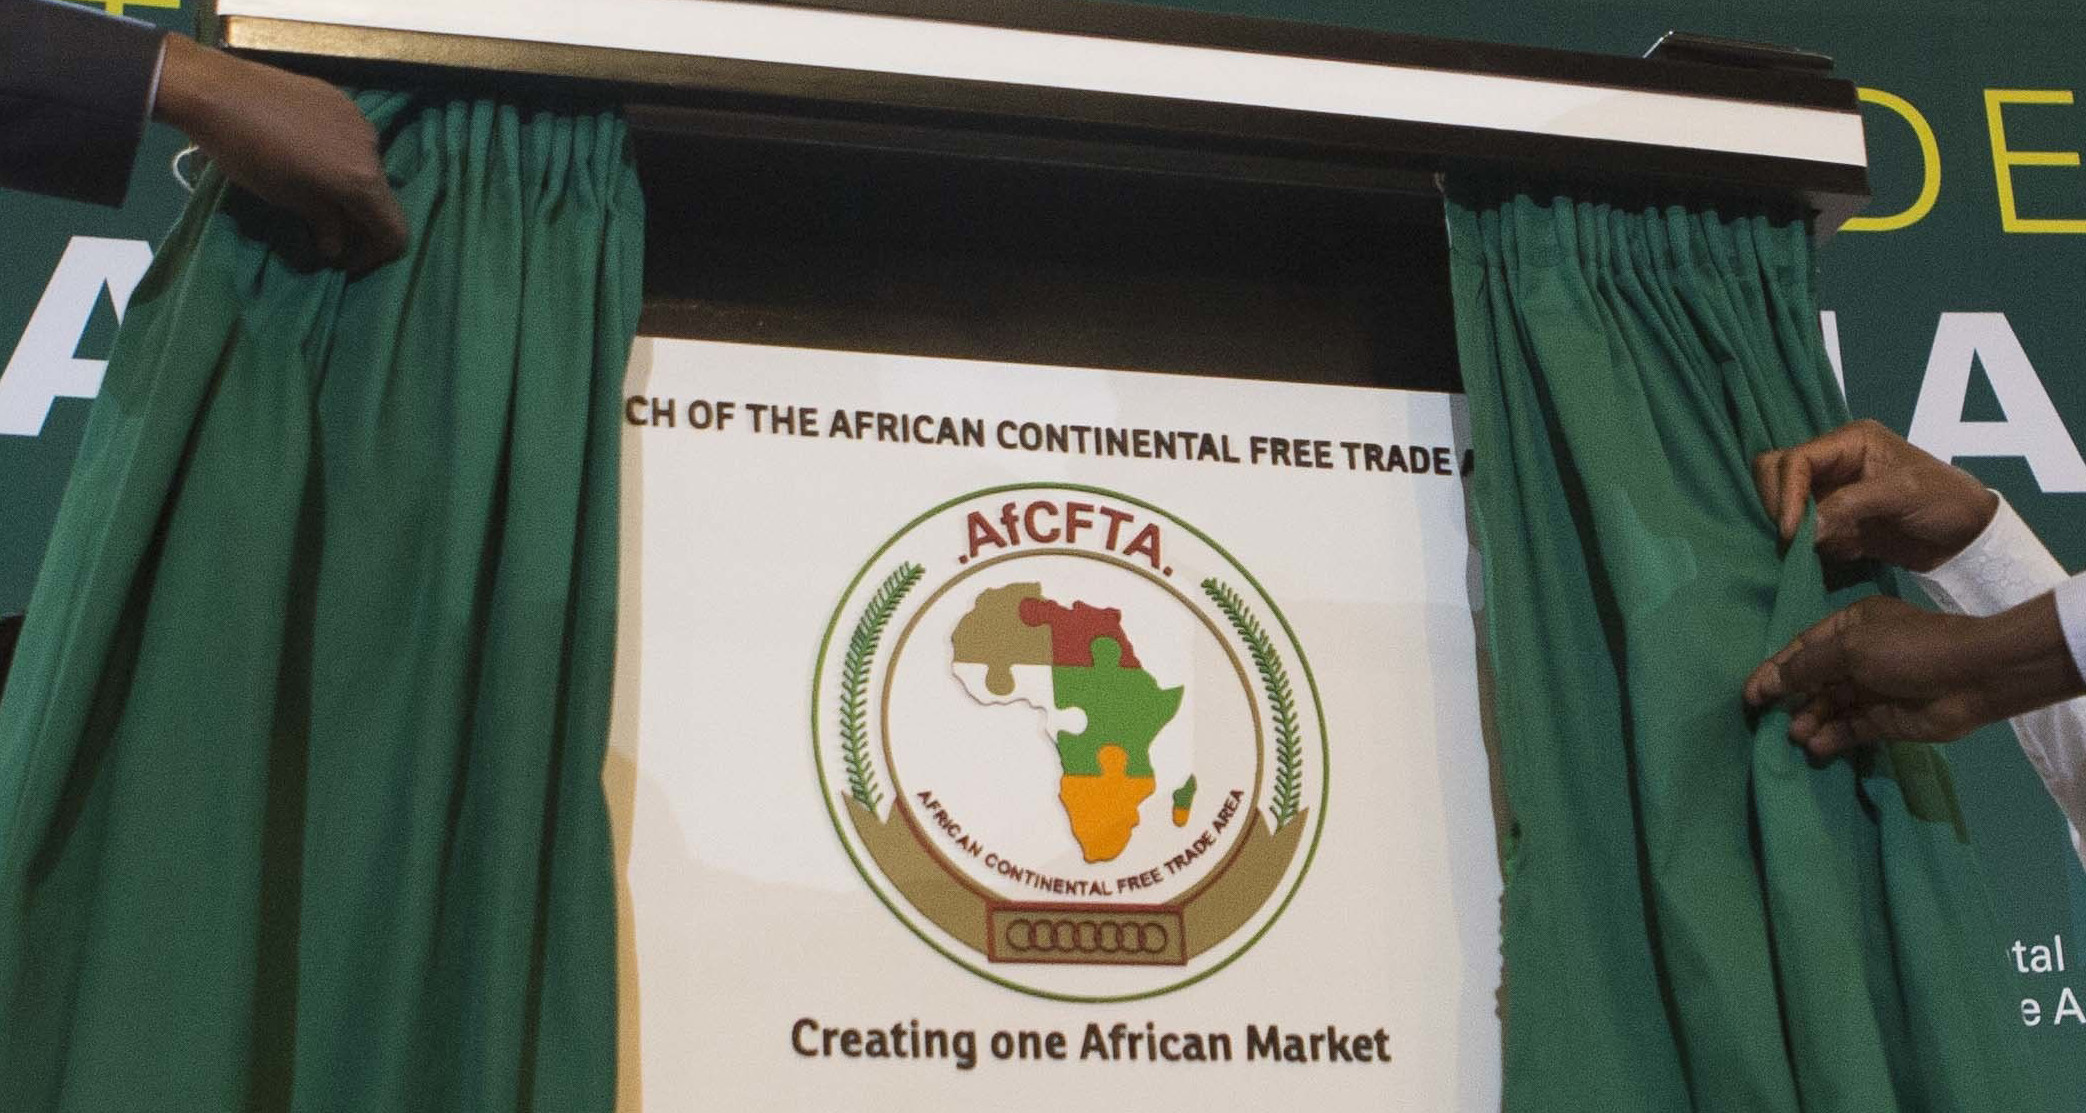 Unveiling of the AfCFTA logo in Kigali in March 2018.